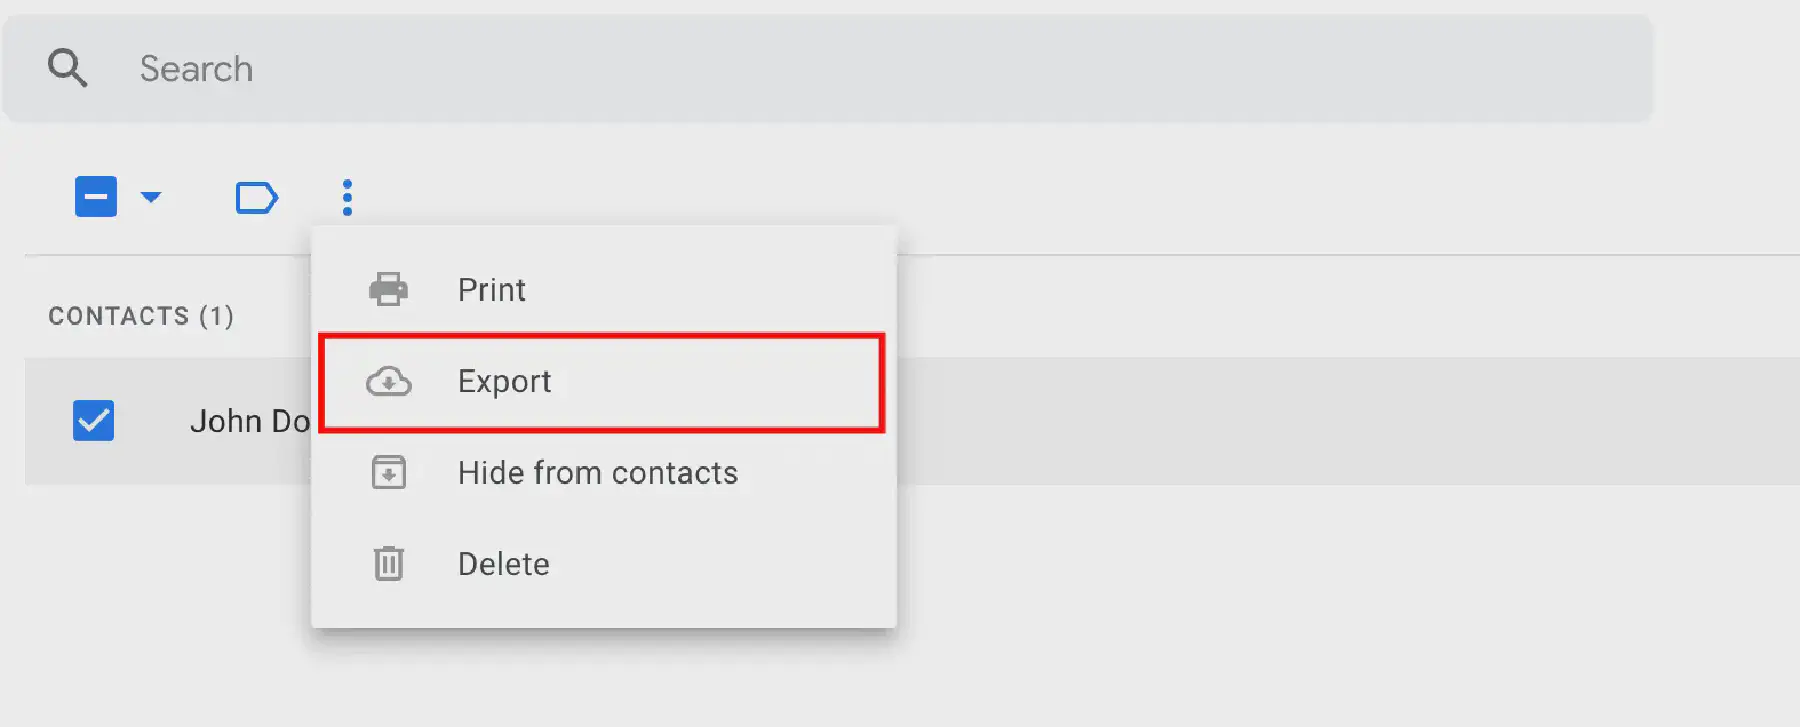 The export button of Google Contacts